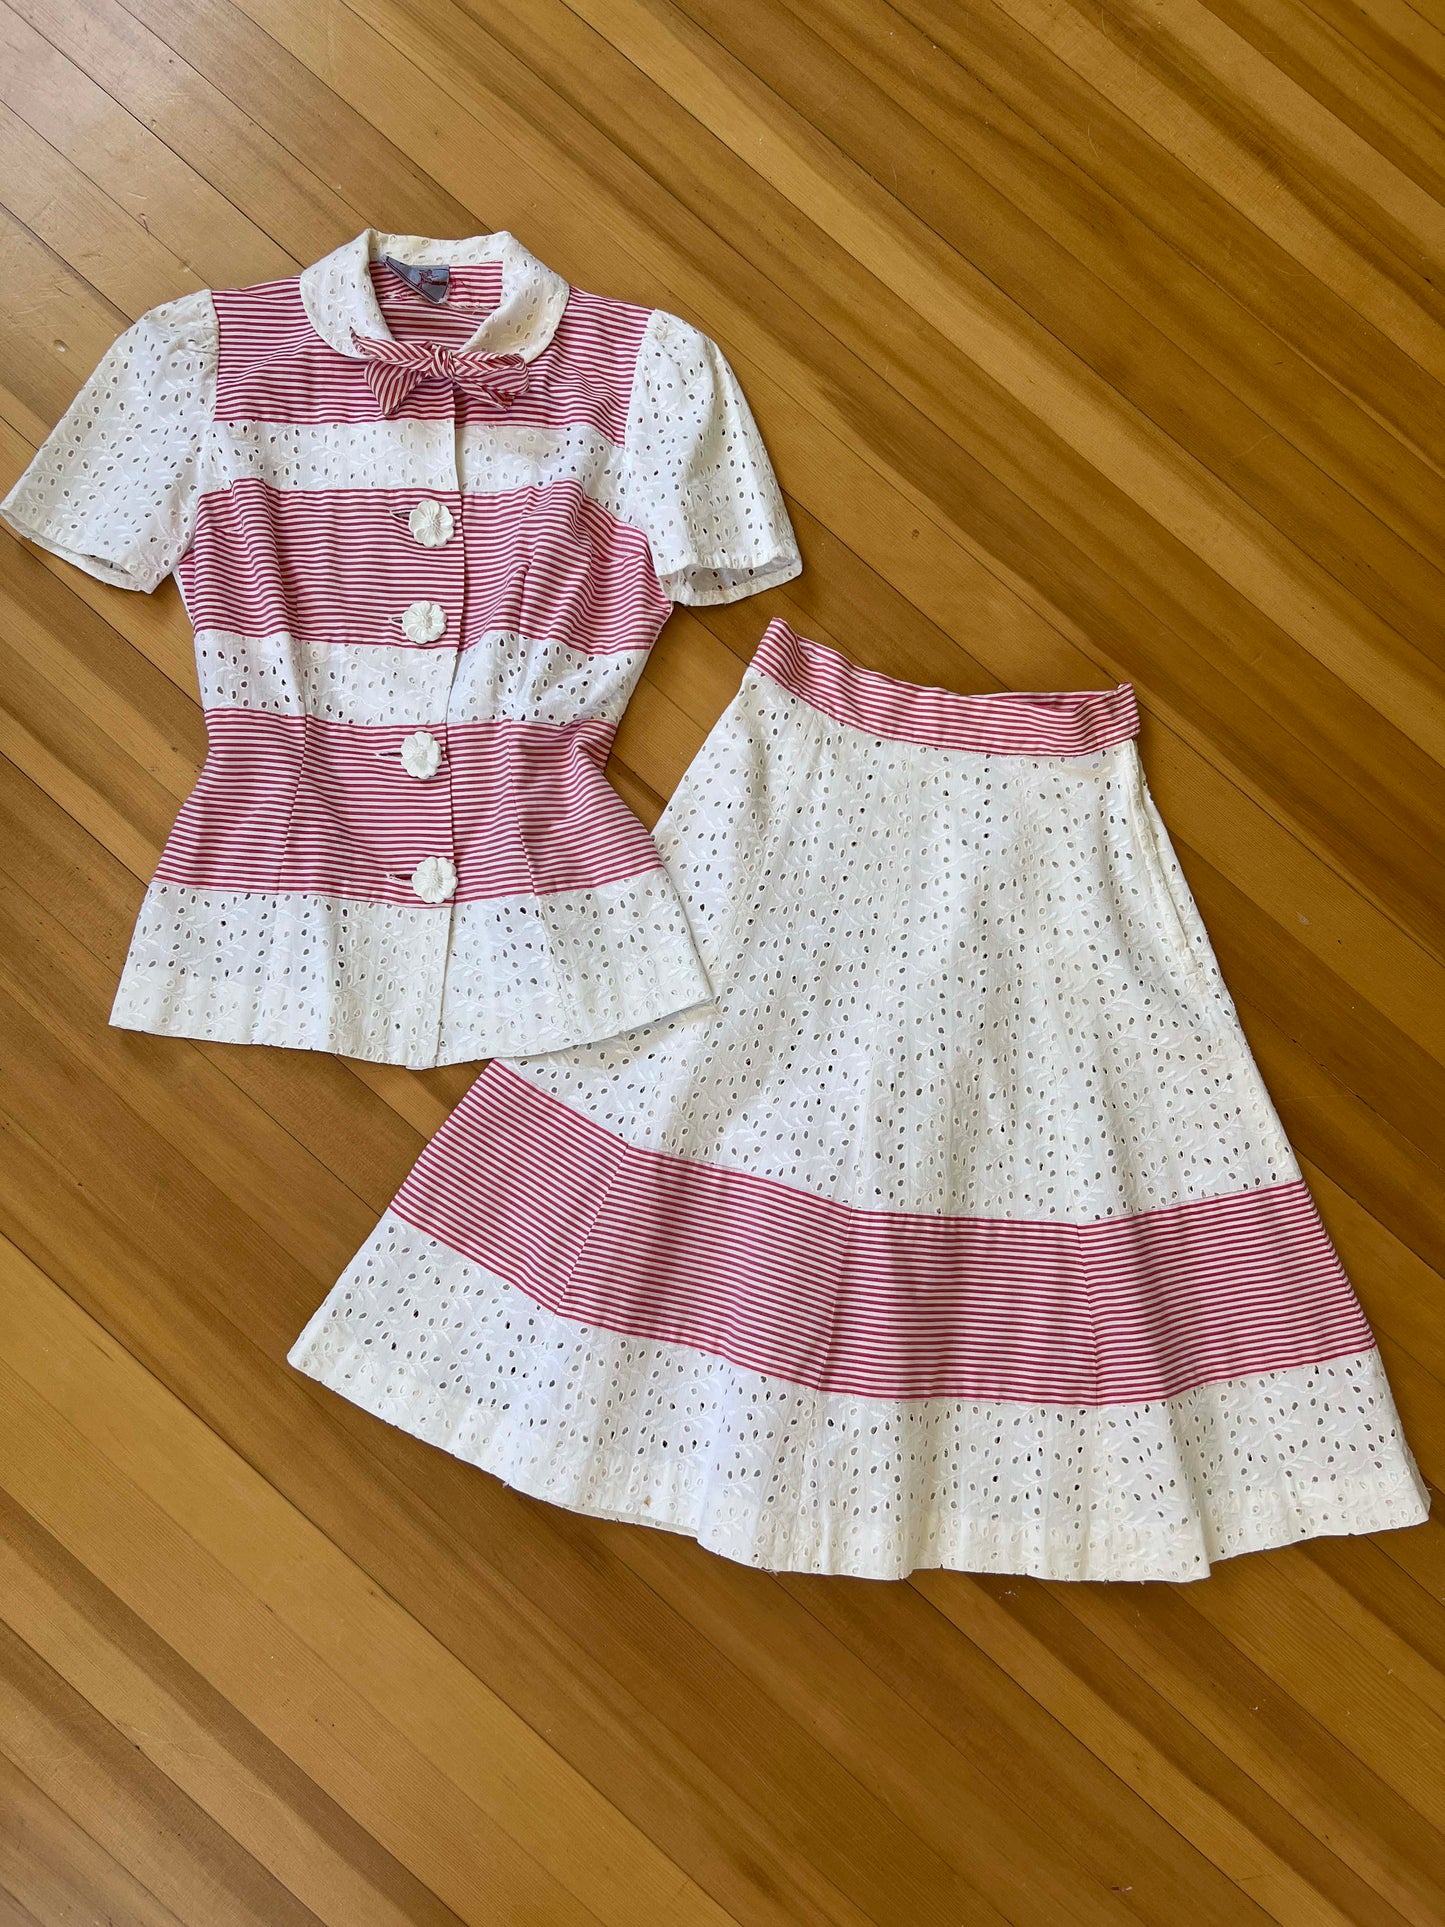 Vintage 1930s to 1940s Cusp Summer Suit - THE CUTEST Deep Pink White Stripe Cotton Eyelet Jacket Skirt w Celluloid Buttons Size XS to S